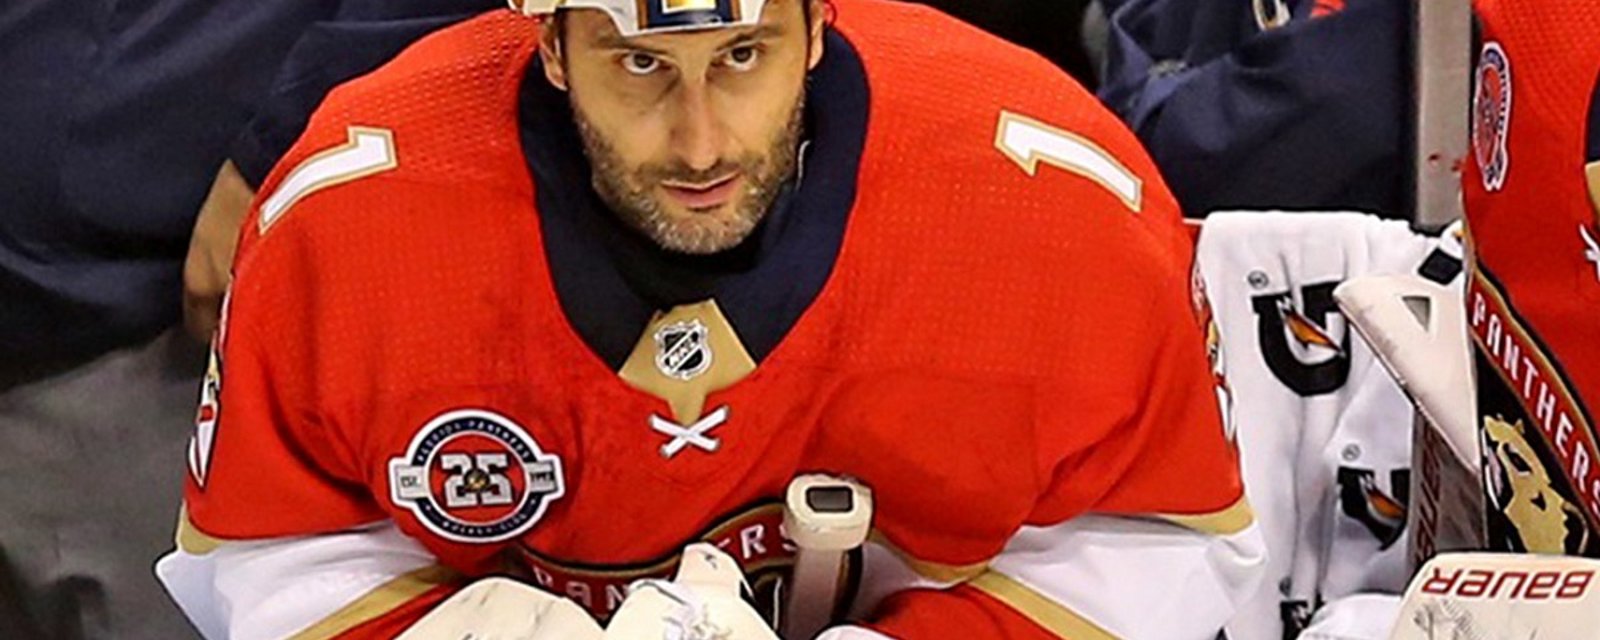 Roberto Luongo gets unique chance at redemption in Game 4.